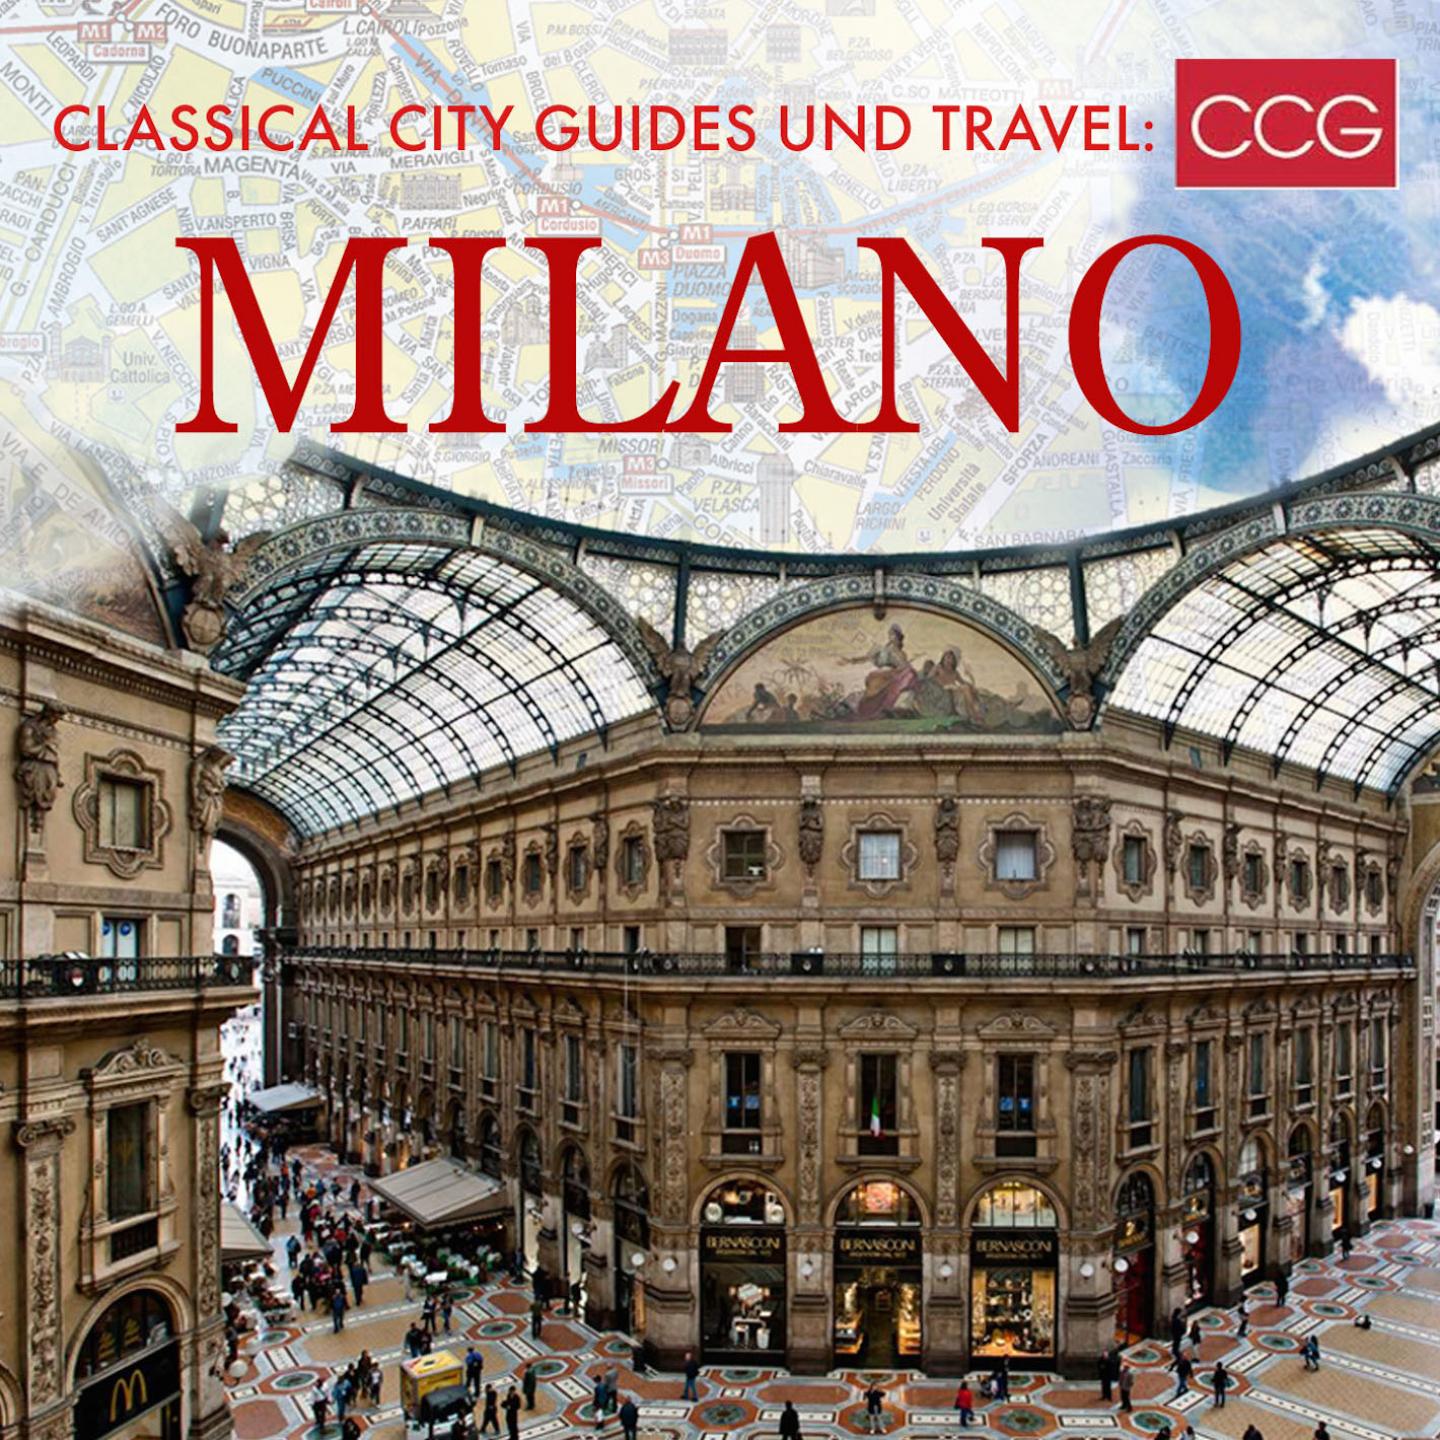 Classical City Guides und Travel: Milano